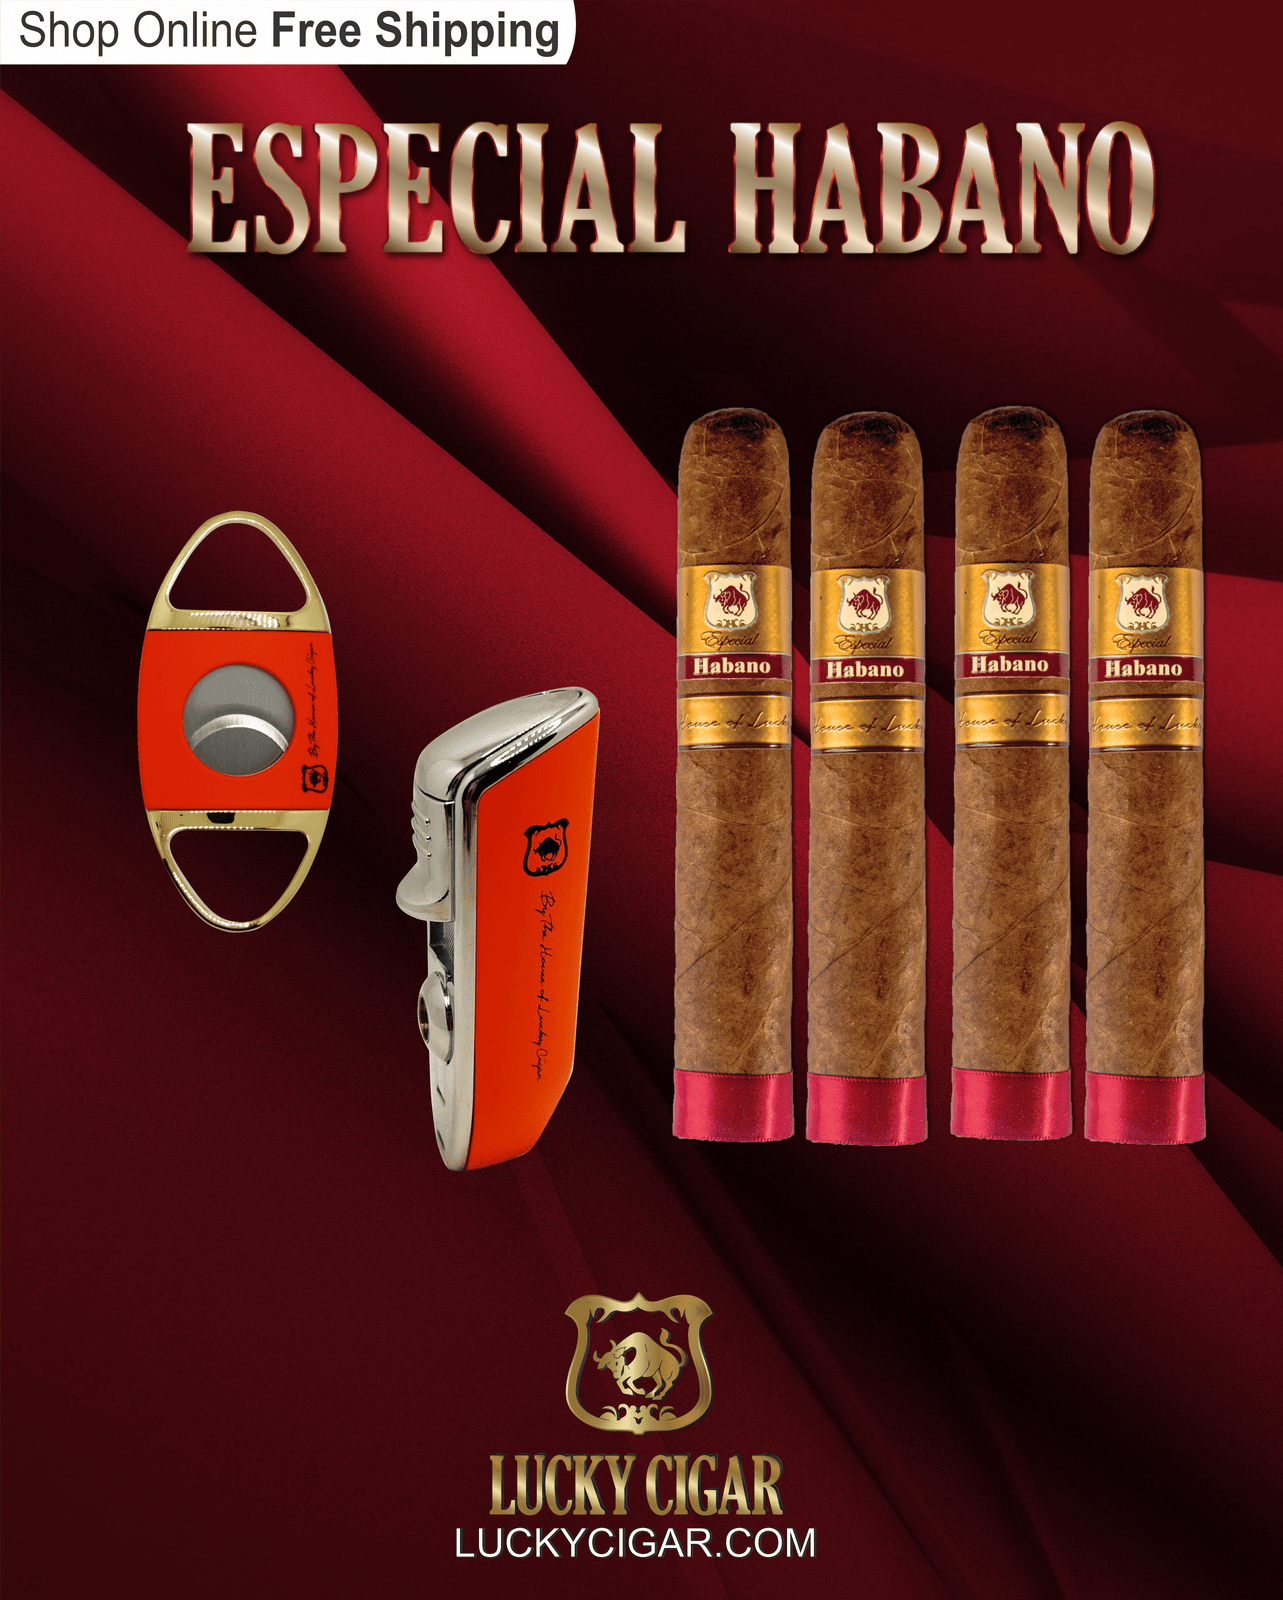 Habano Cigars: Especial Habano by Lucky Cigar: Set of 4 Cigars 4 Toro with Lighter and Cutter